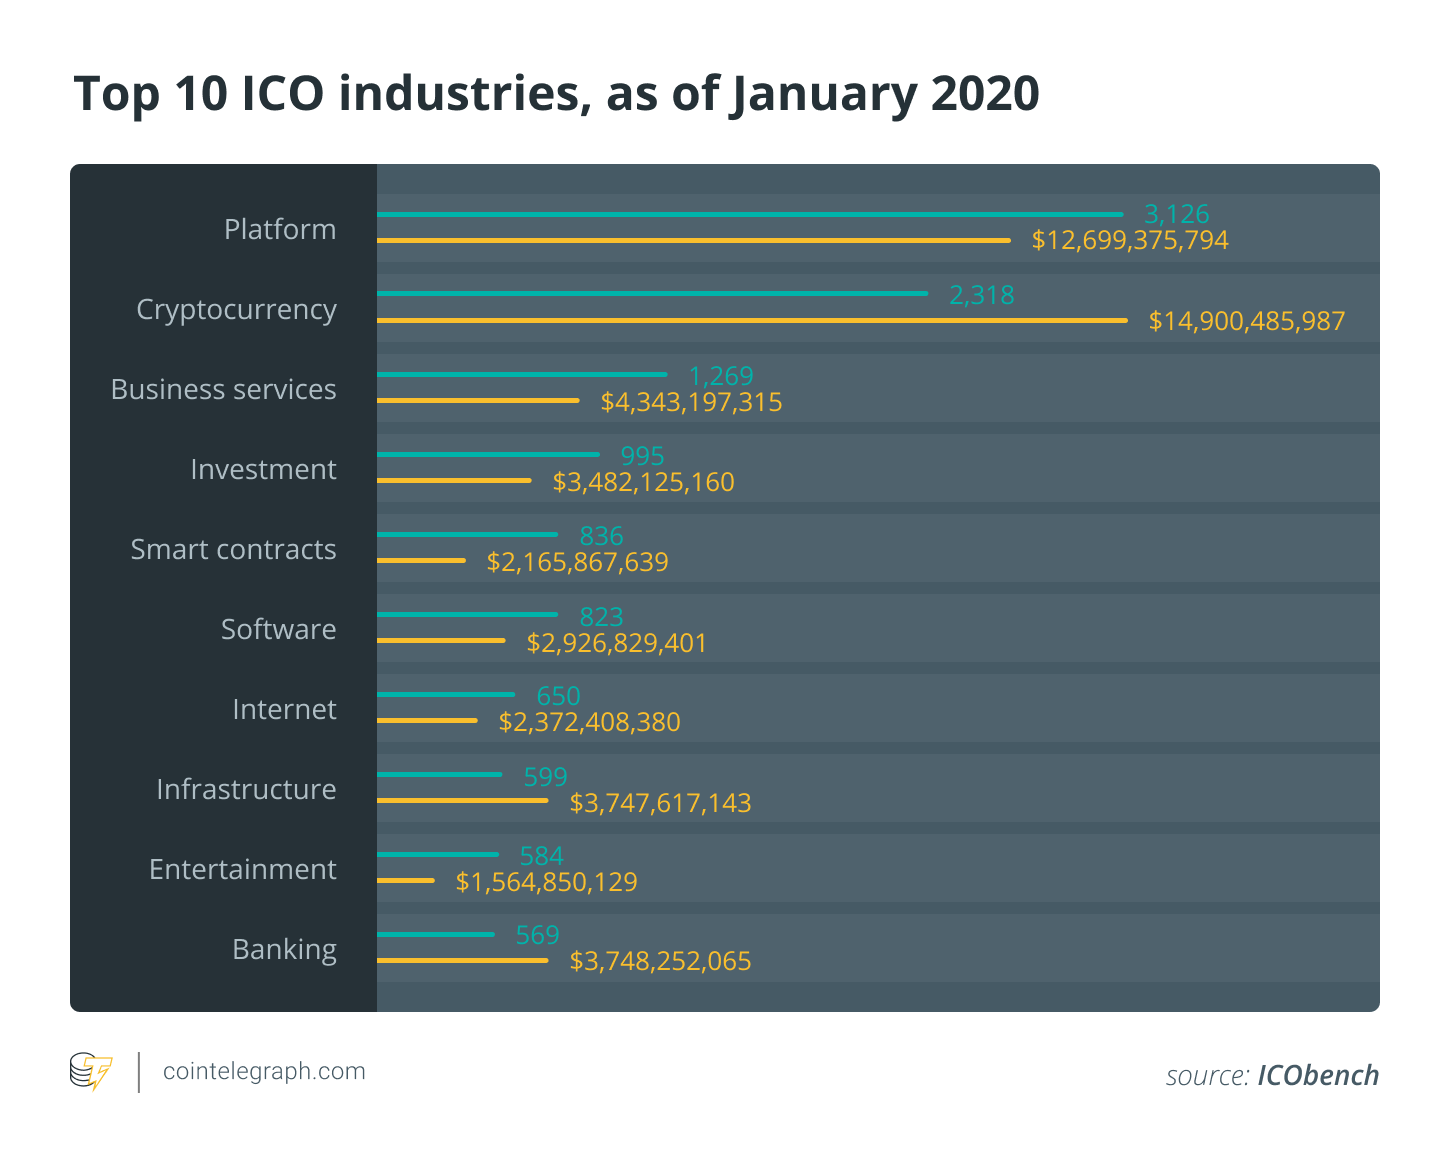 Top 10 ICO industries, as of January 2020